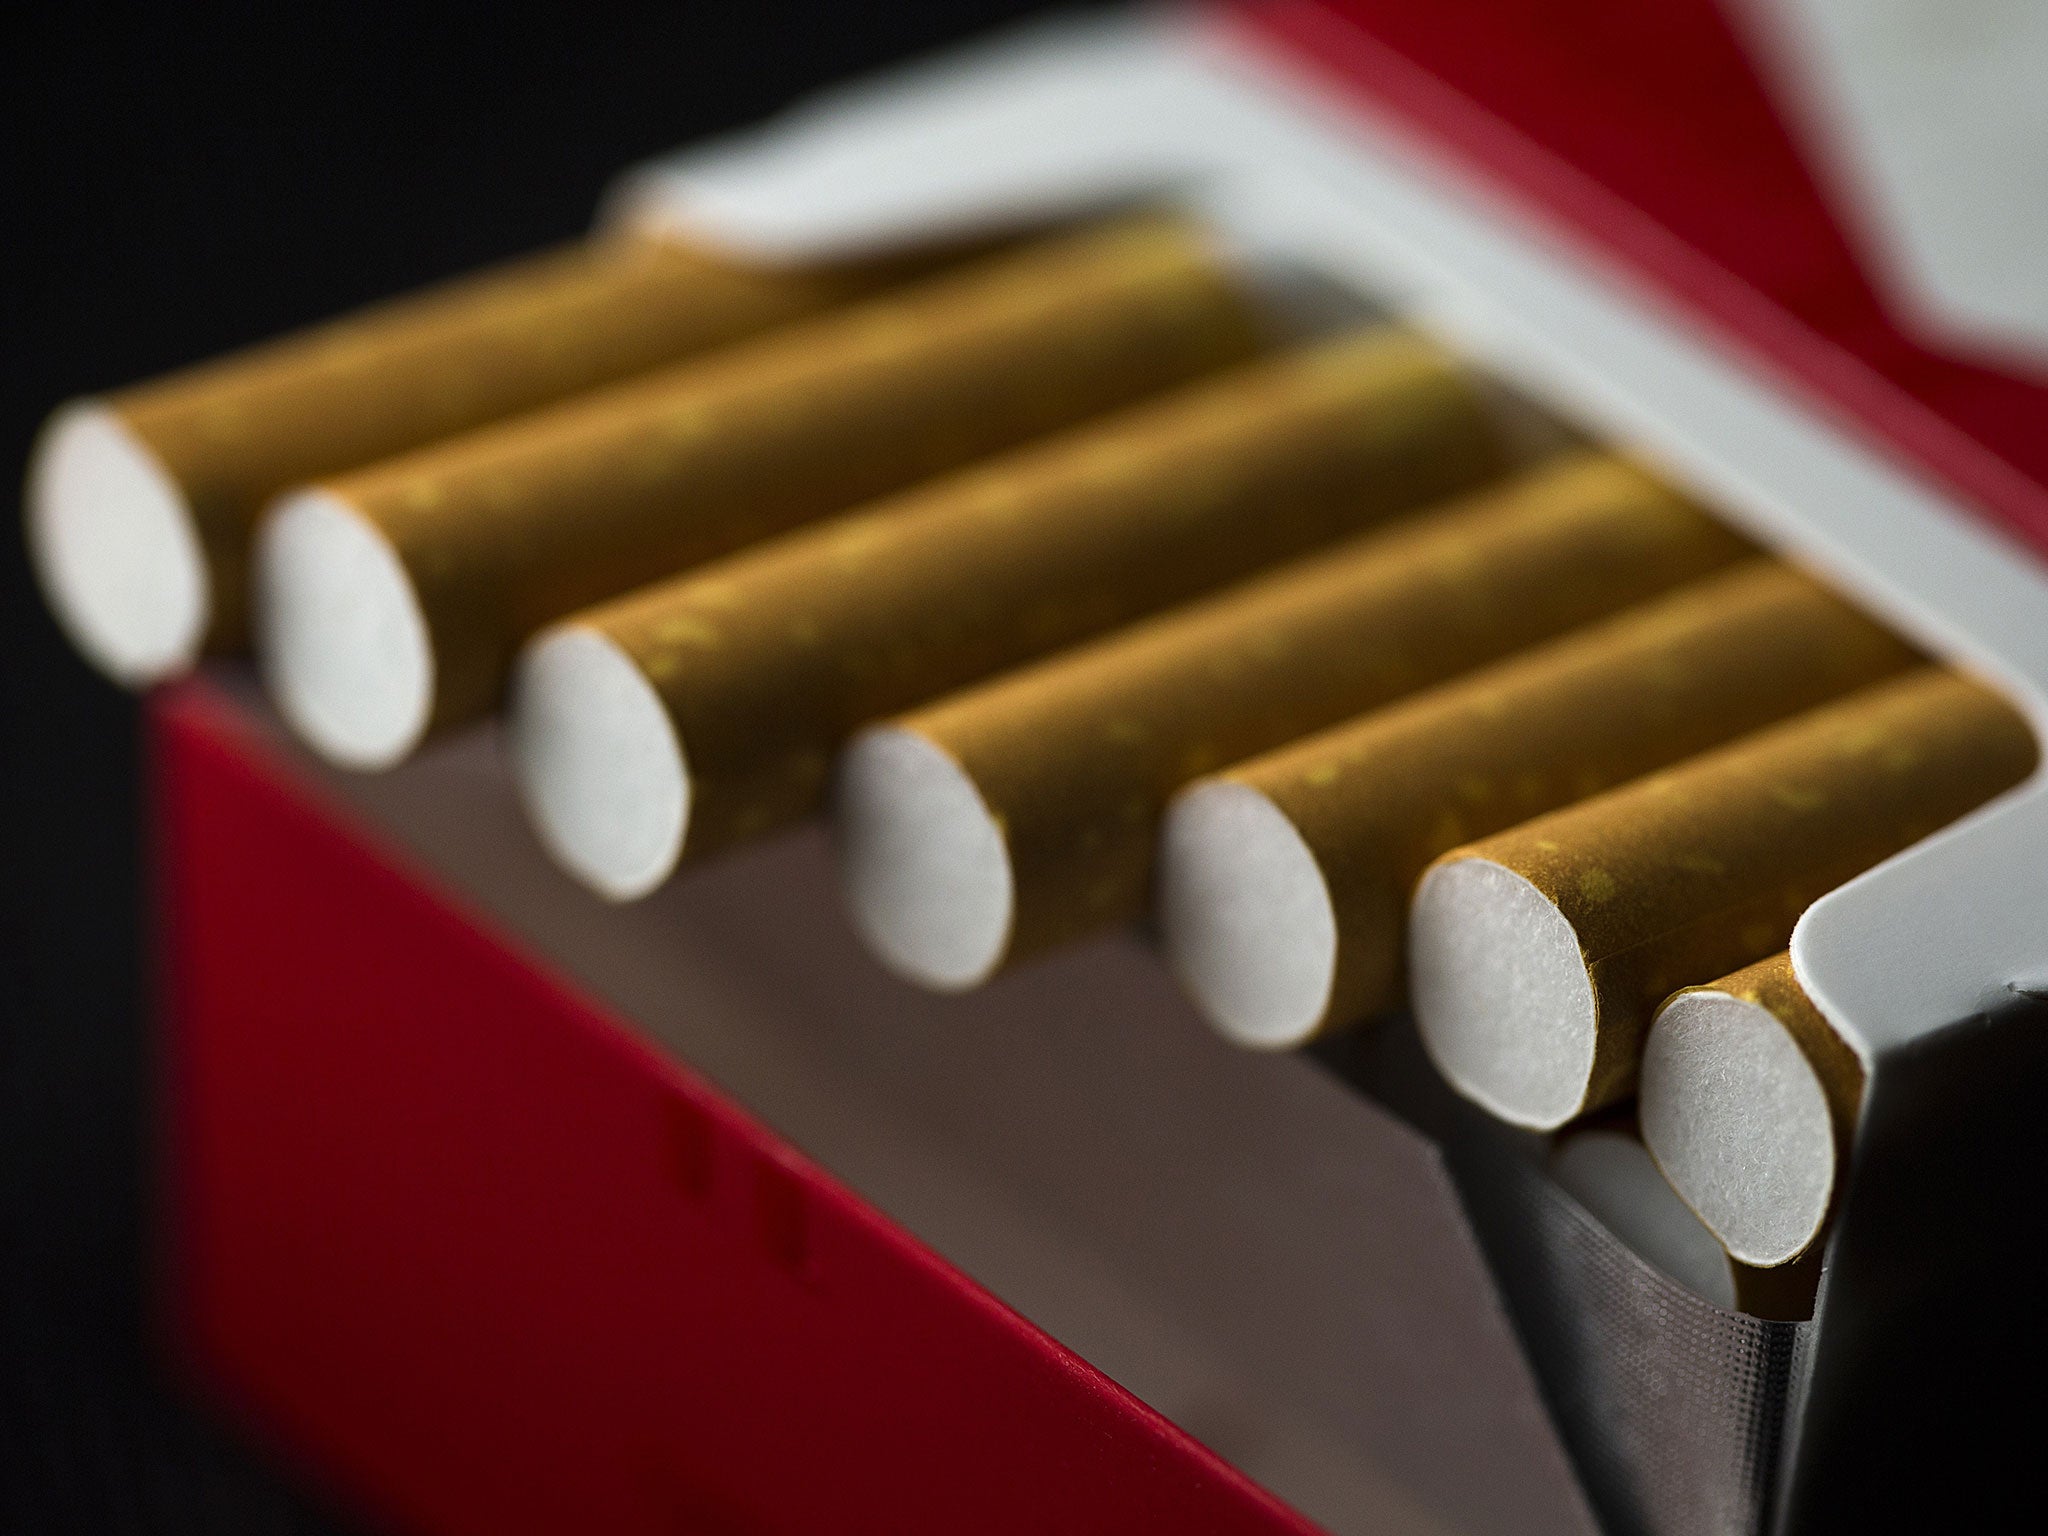 MPs have voted in favour of plain cigarette packaging